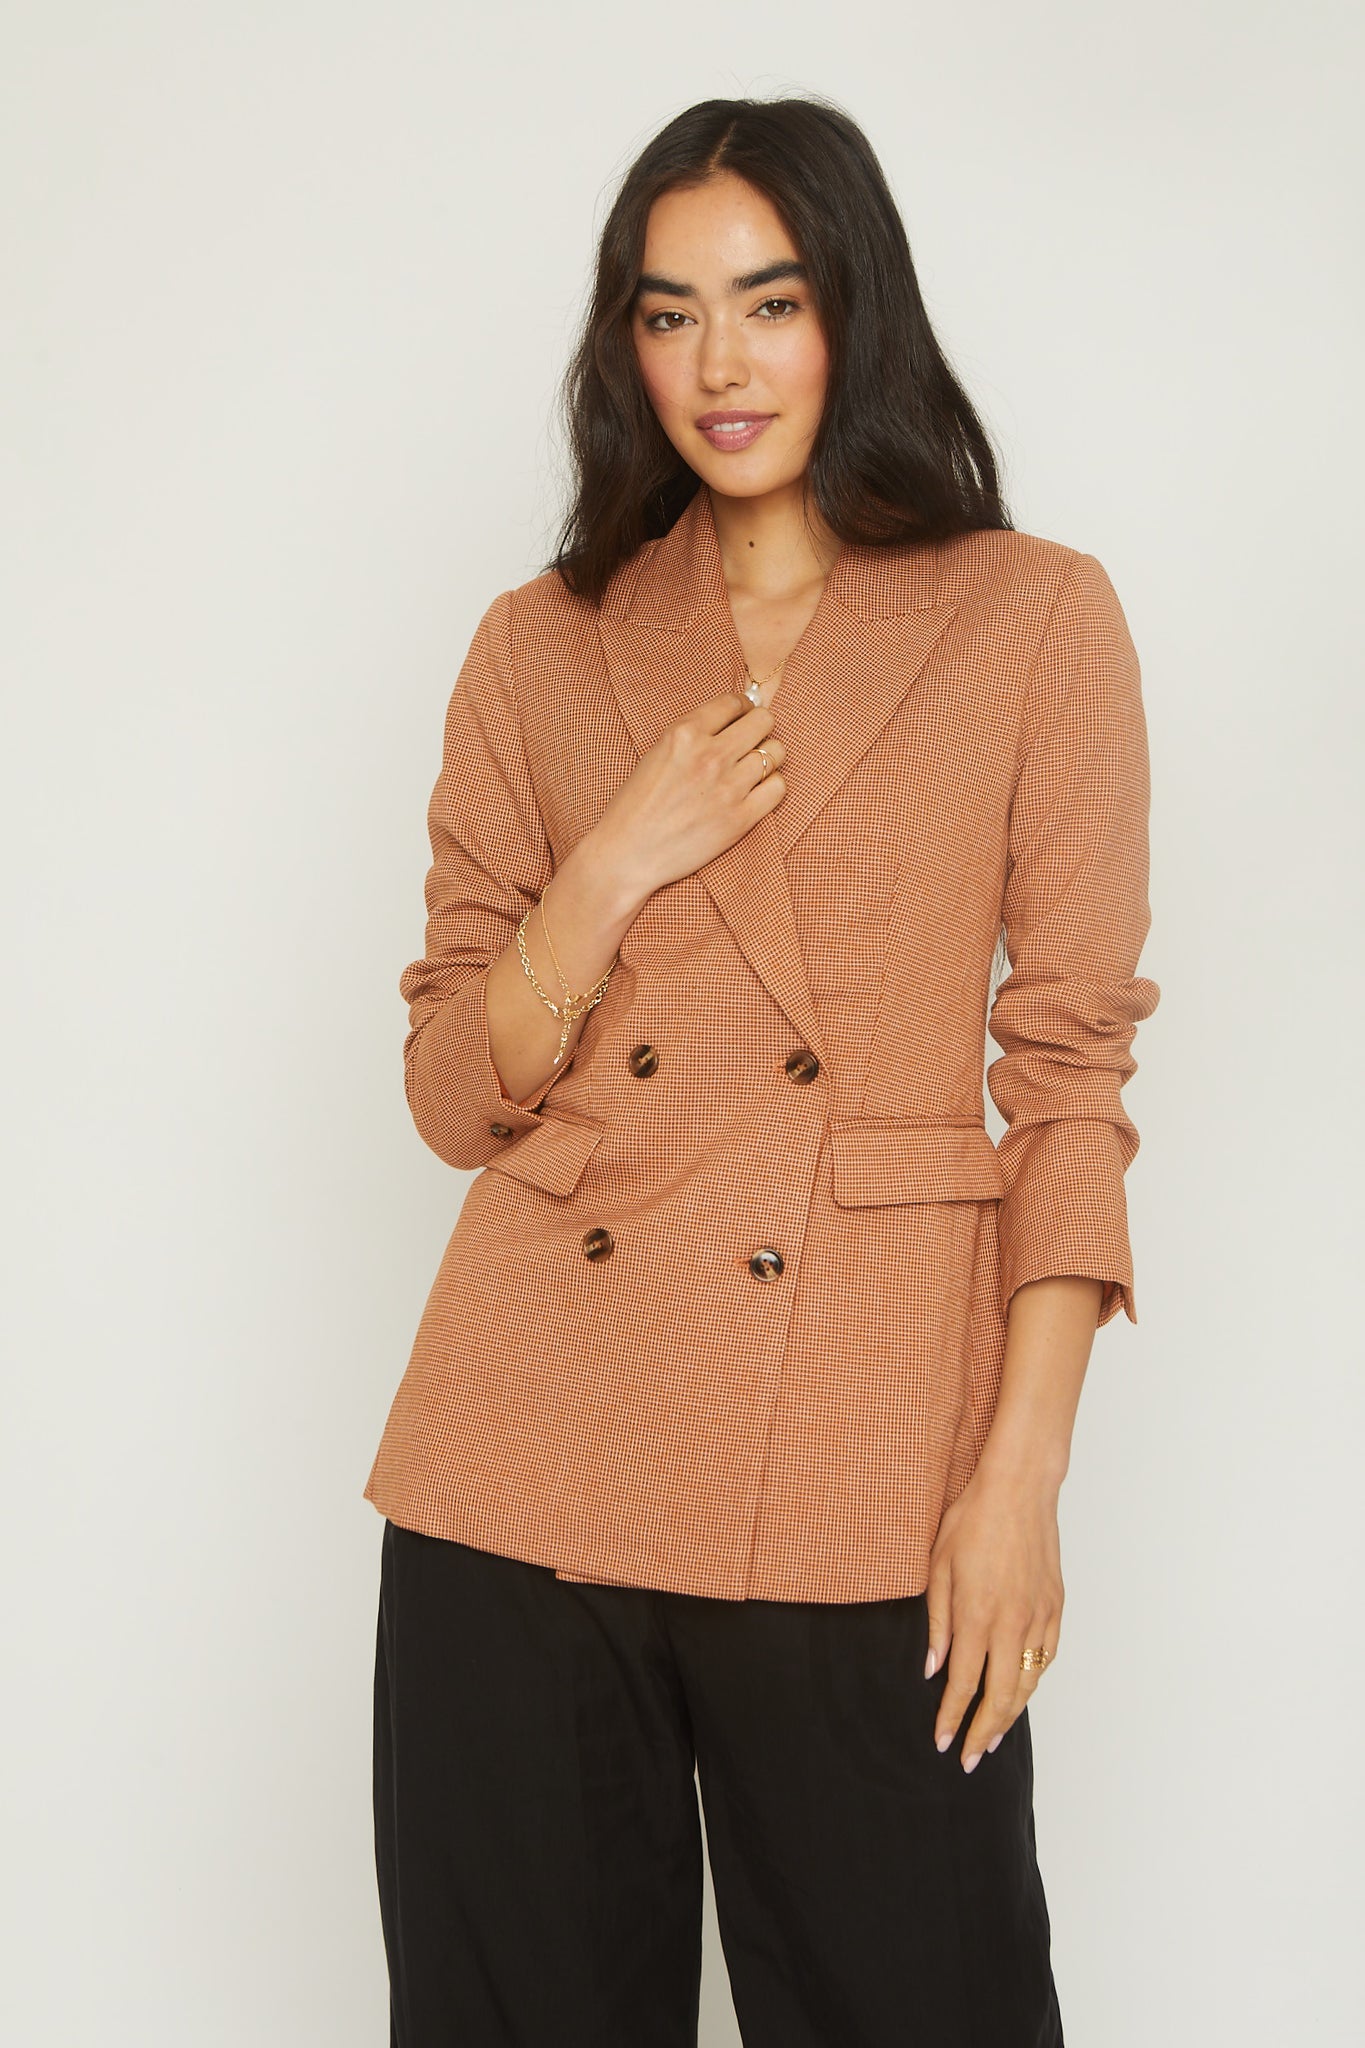 Double Breasted Check Blazer Rust Front Pockets Long Sleeve Jacket Workwear Office Wear Outerwear Classic Chic Timeless